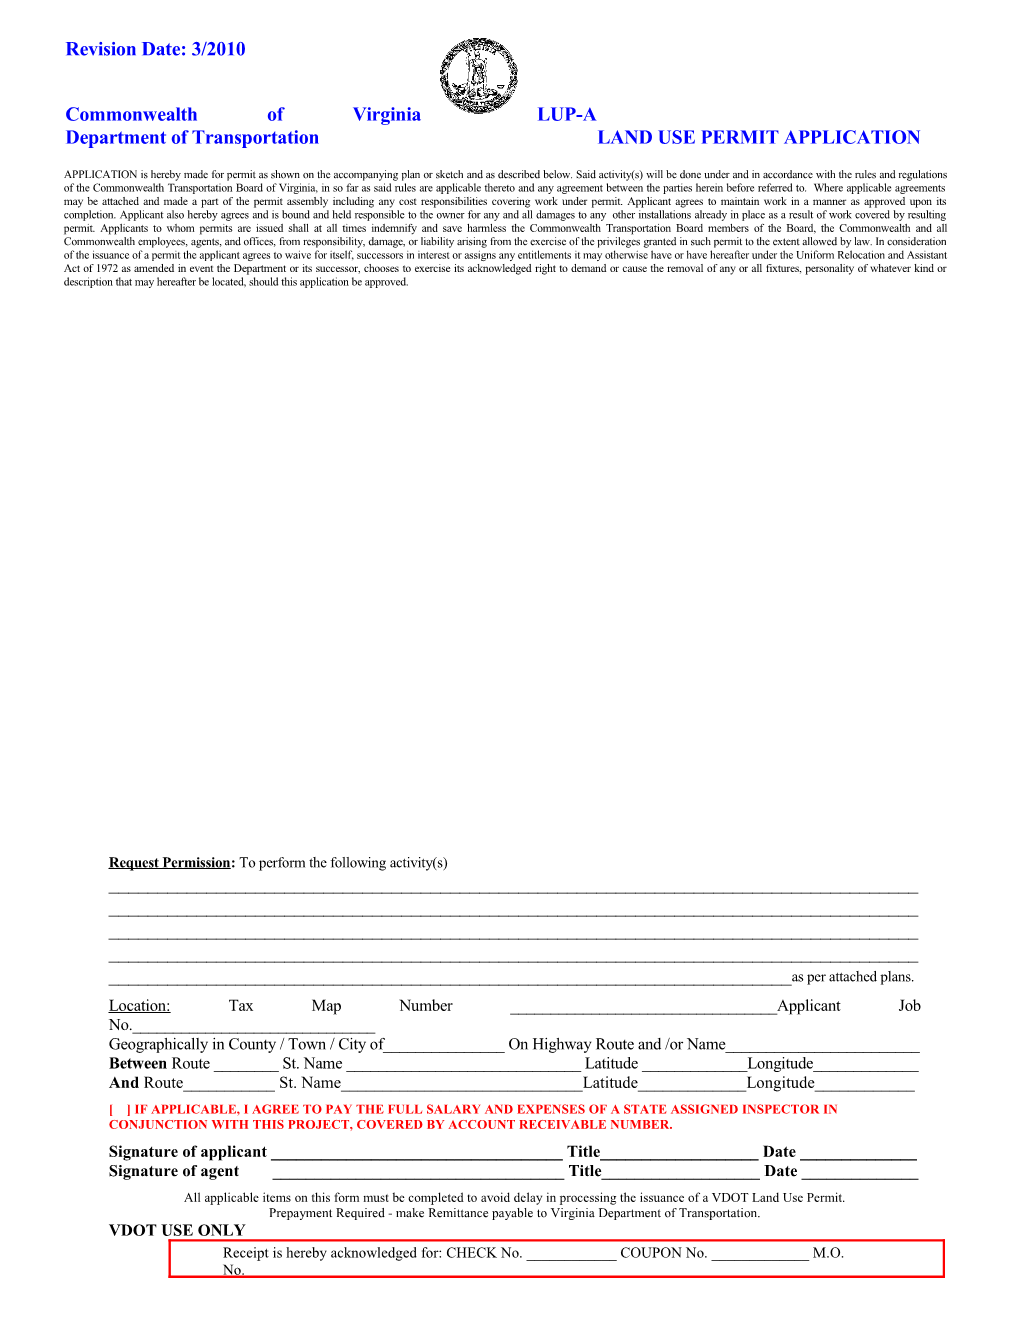 Department of Transportation LAND USE PERMIT APPLICATION